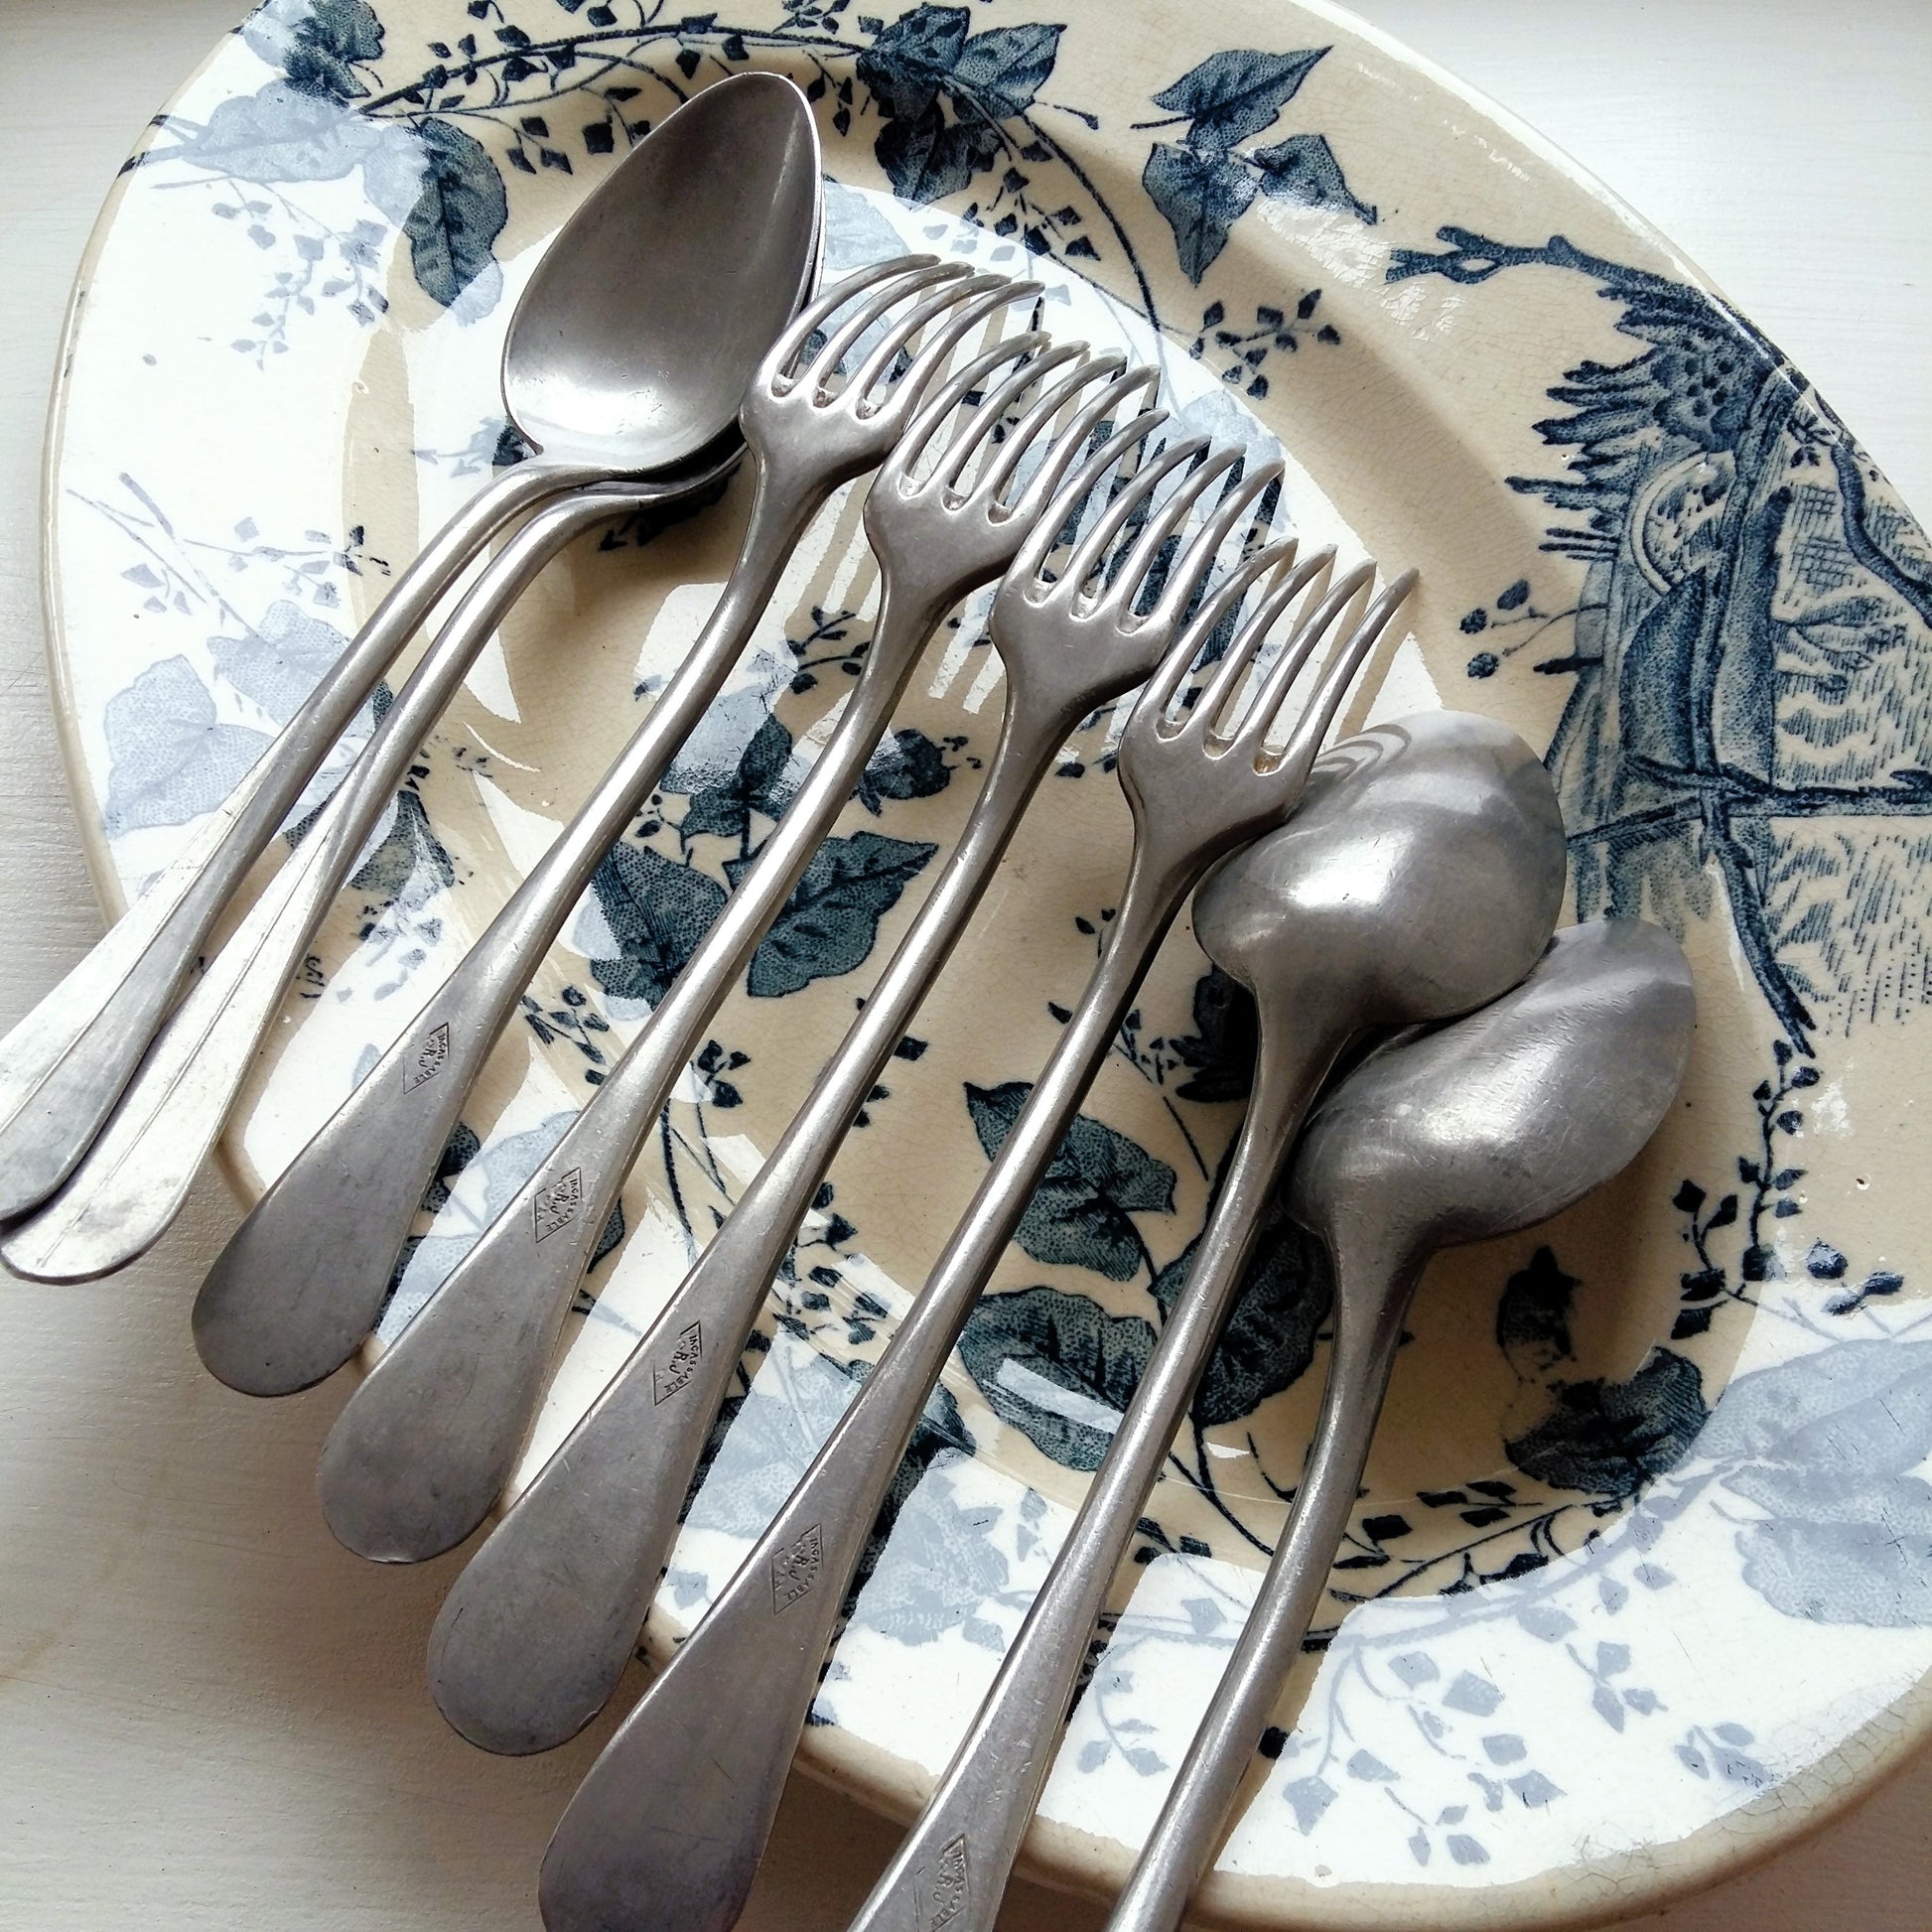 8 Antique Forks & Dessert Spoons from Tiggy & Pip - Just €64! Shop now at Tiggy and Pip